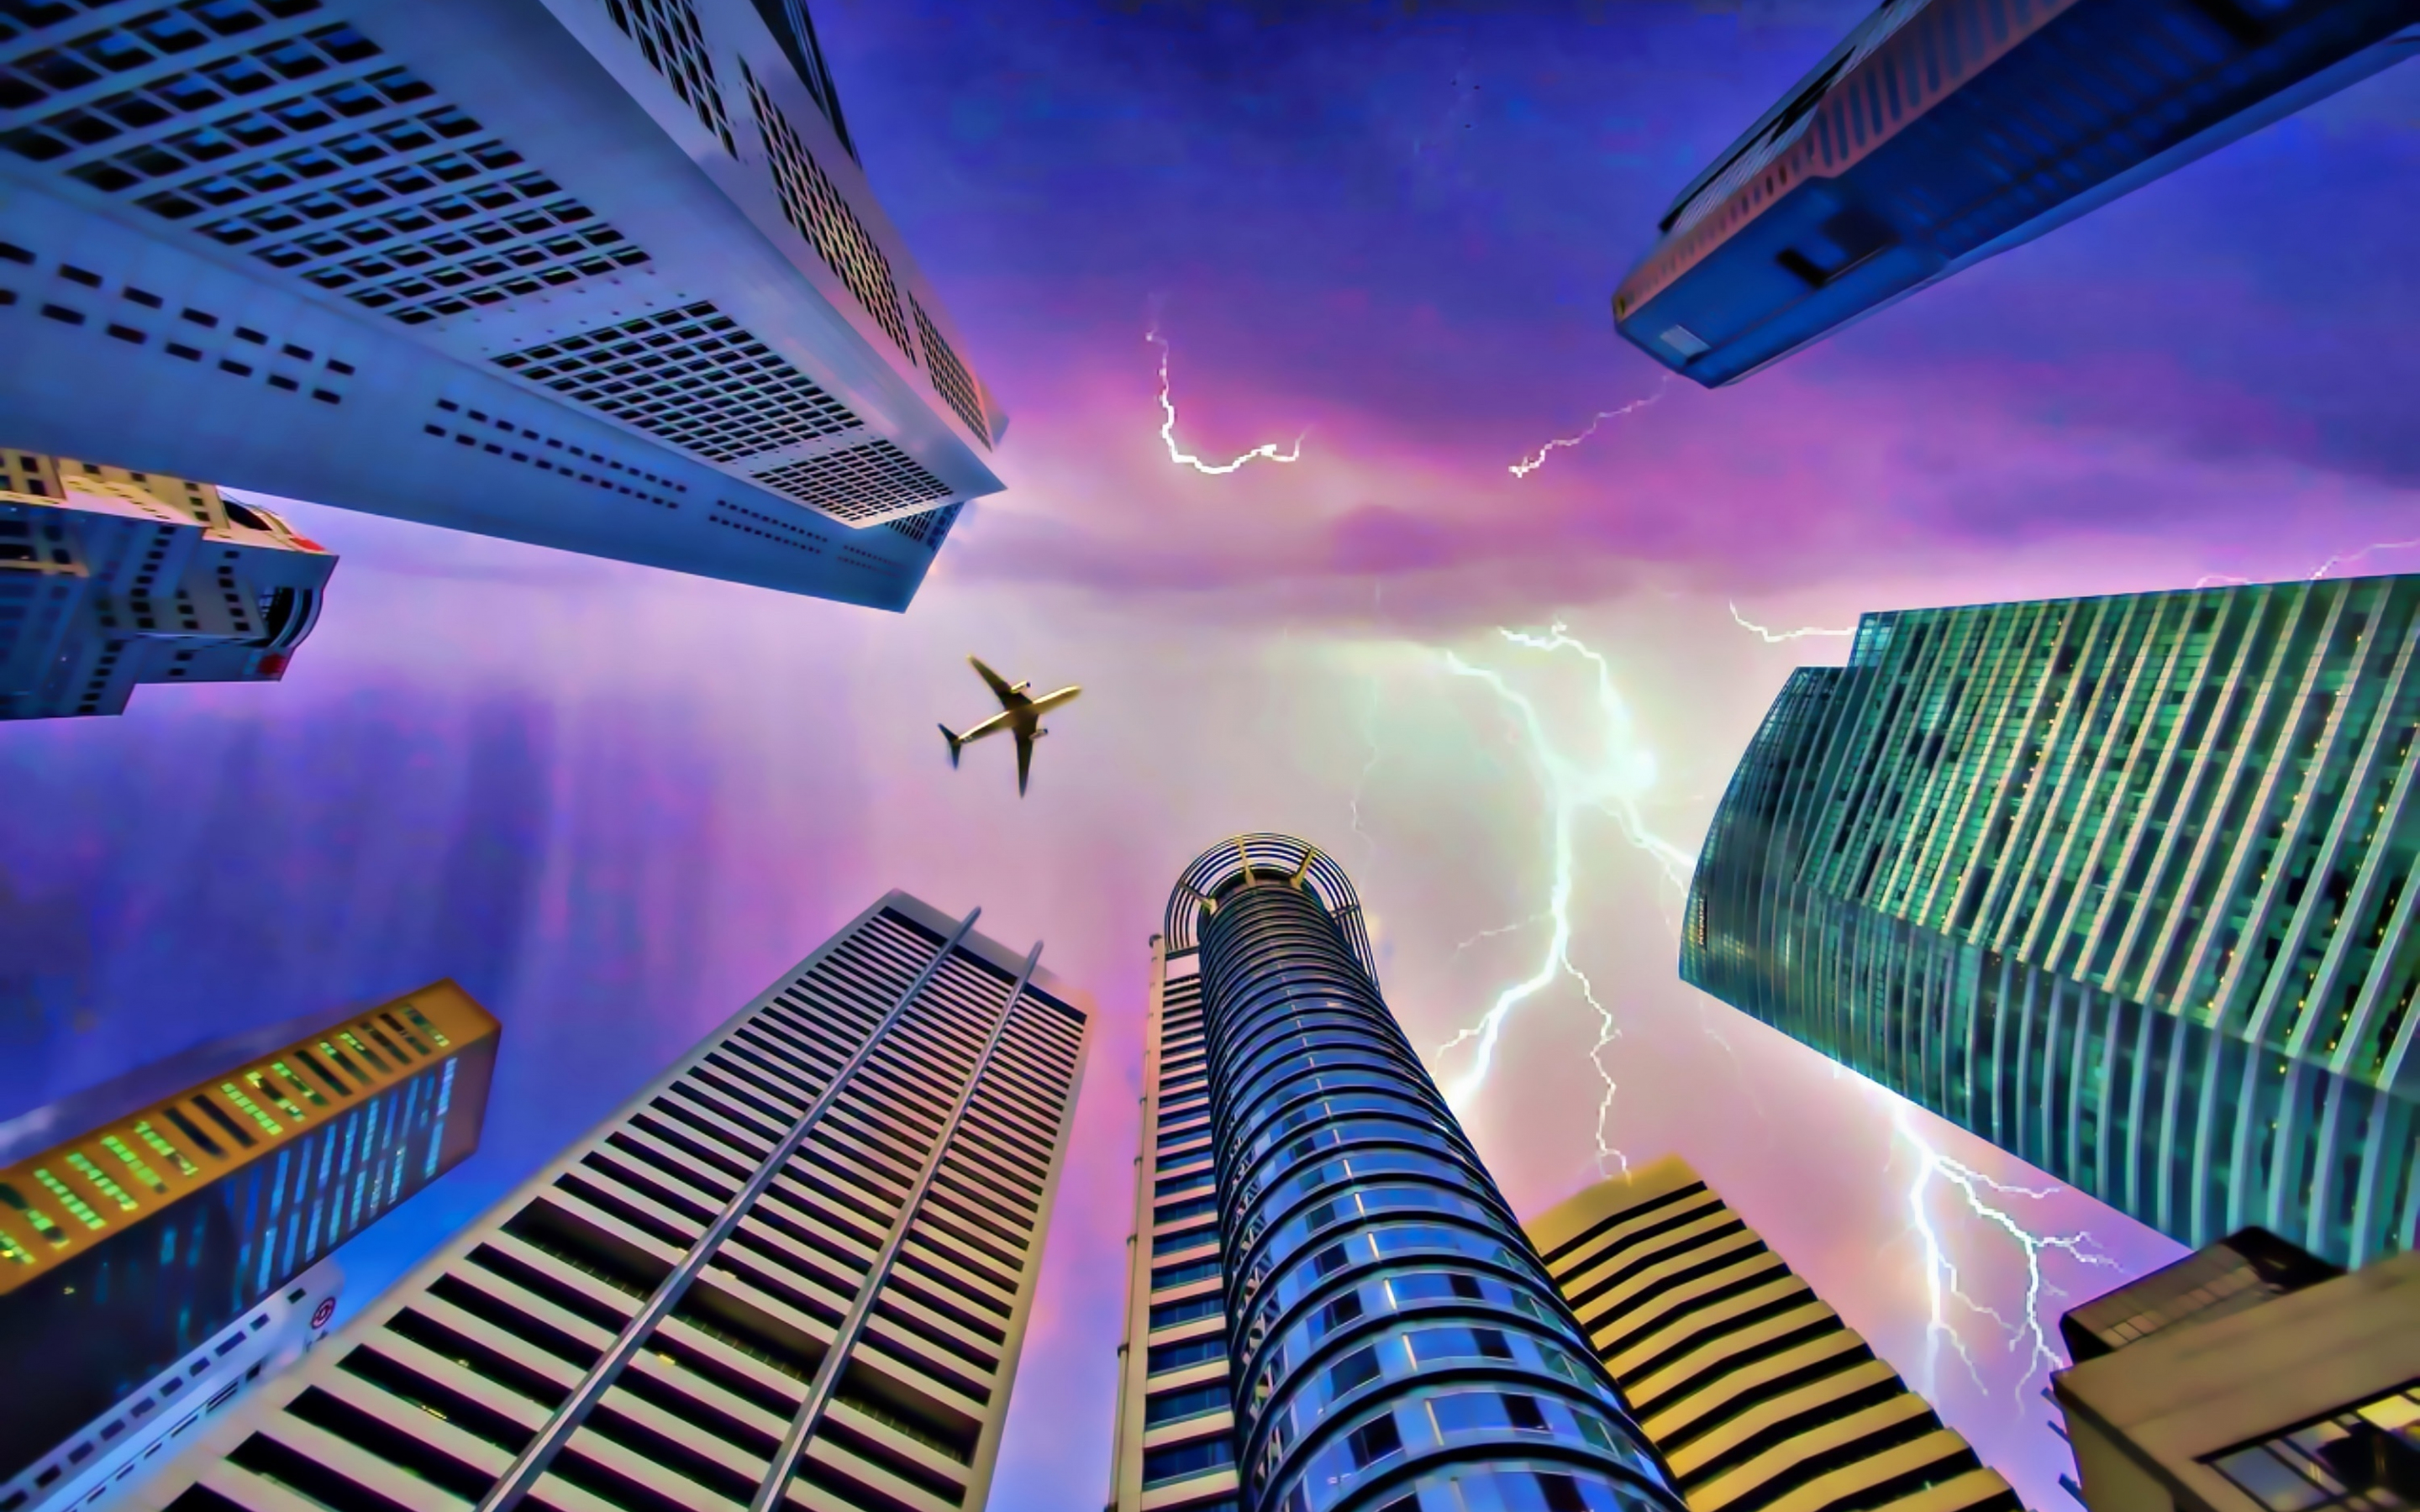 Skyscrapers, lighting, airplane, clouds, photoshop, 2880x1800 wallpaper